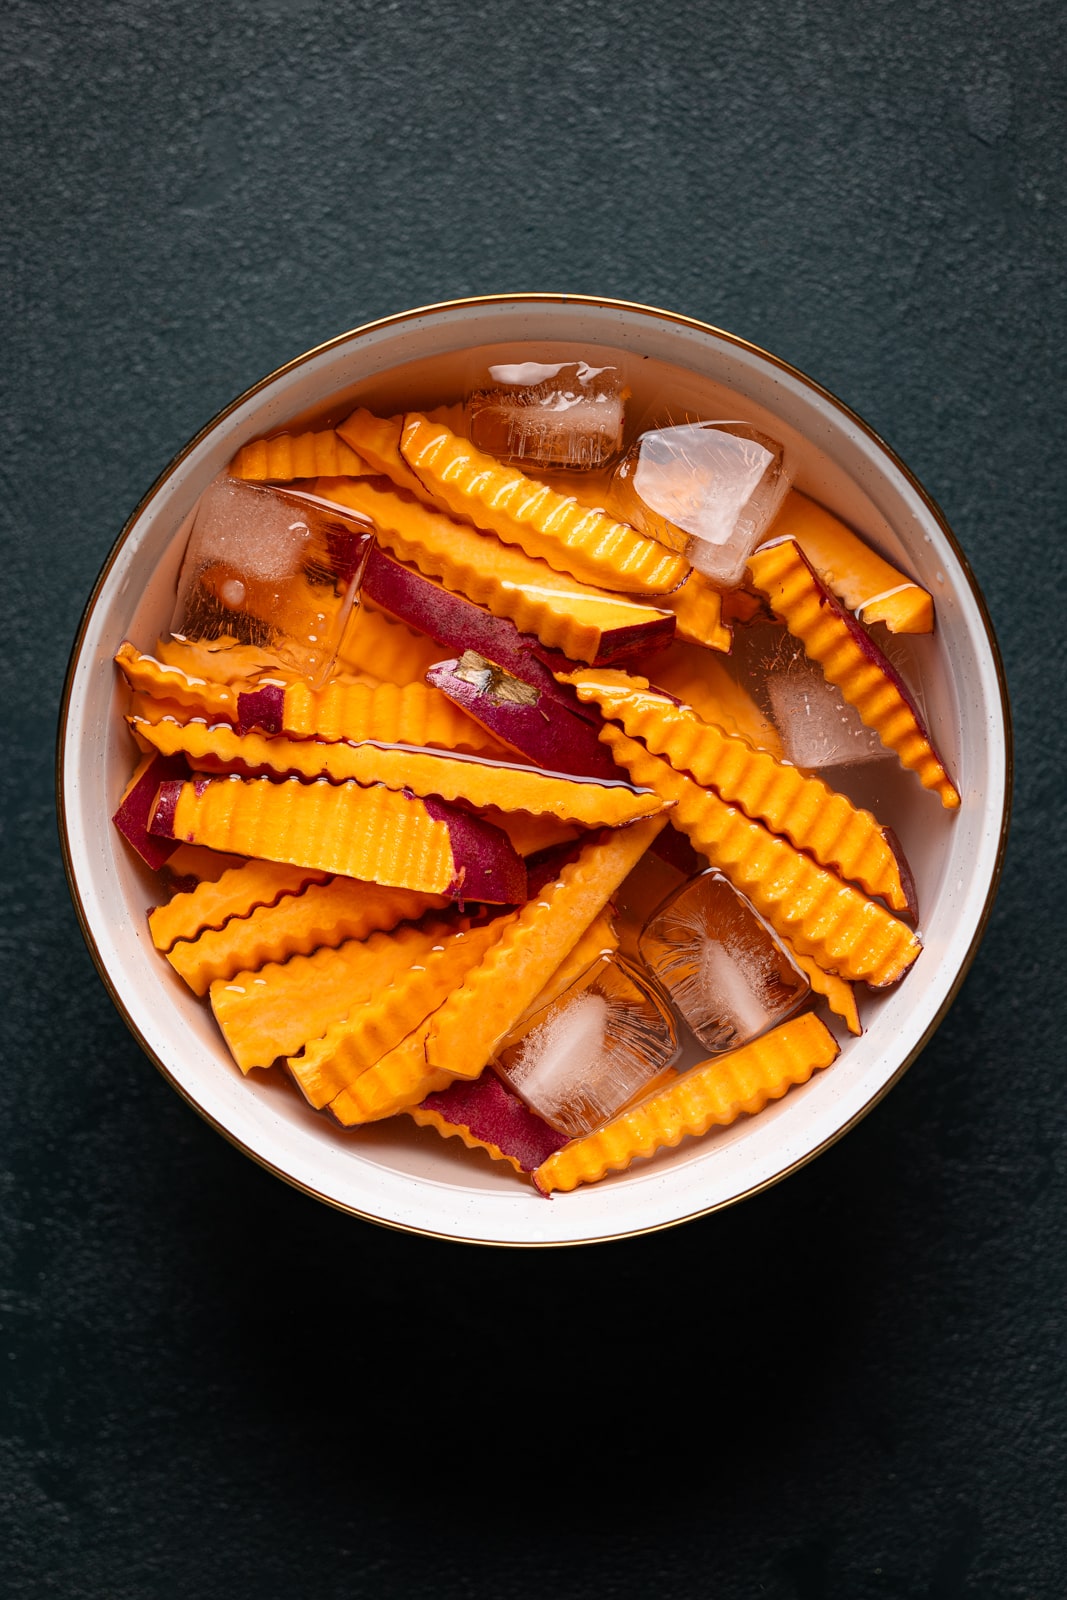 Sweet potatoes cut into fries in a bowl with water and ice.